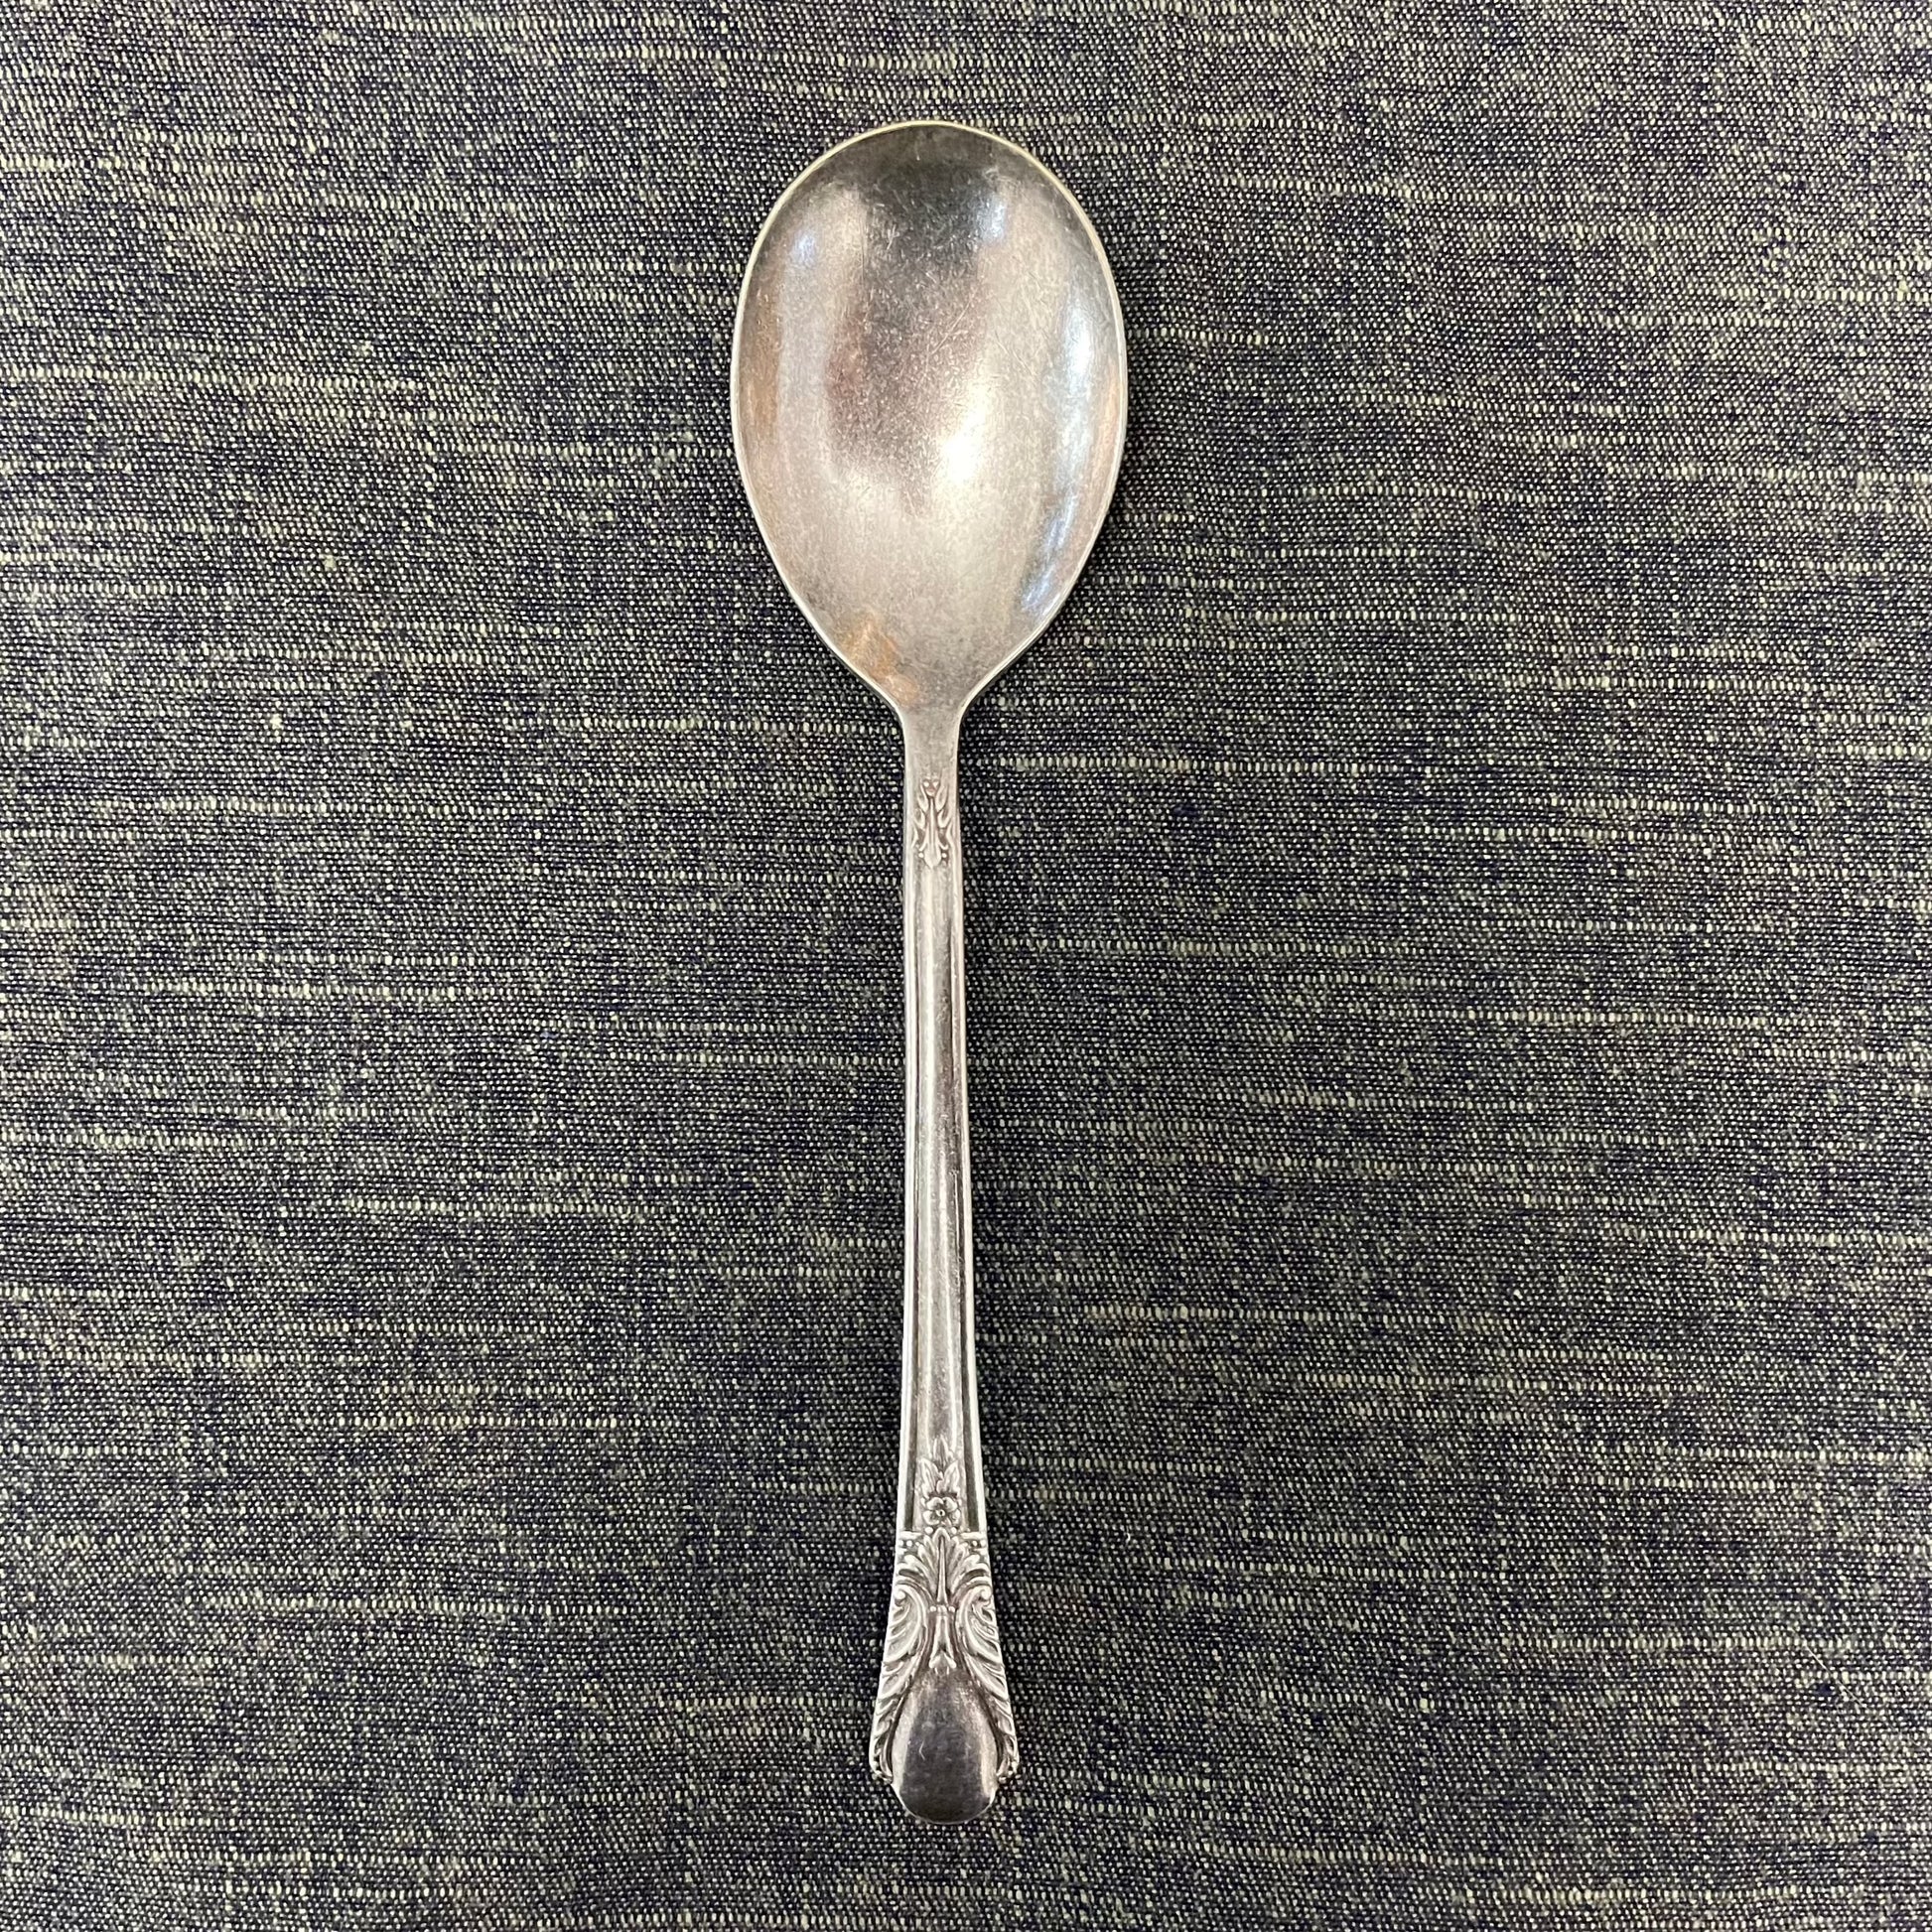 antique silver sugar spoon for serving or prop photography